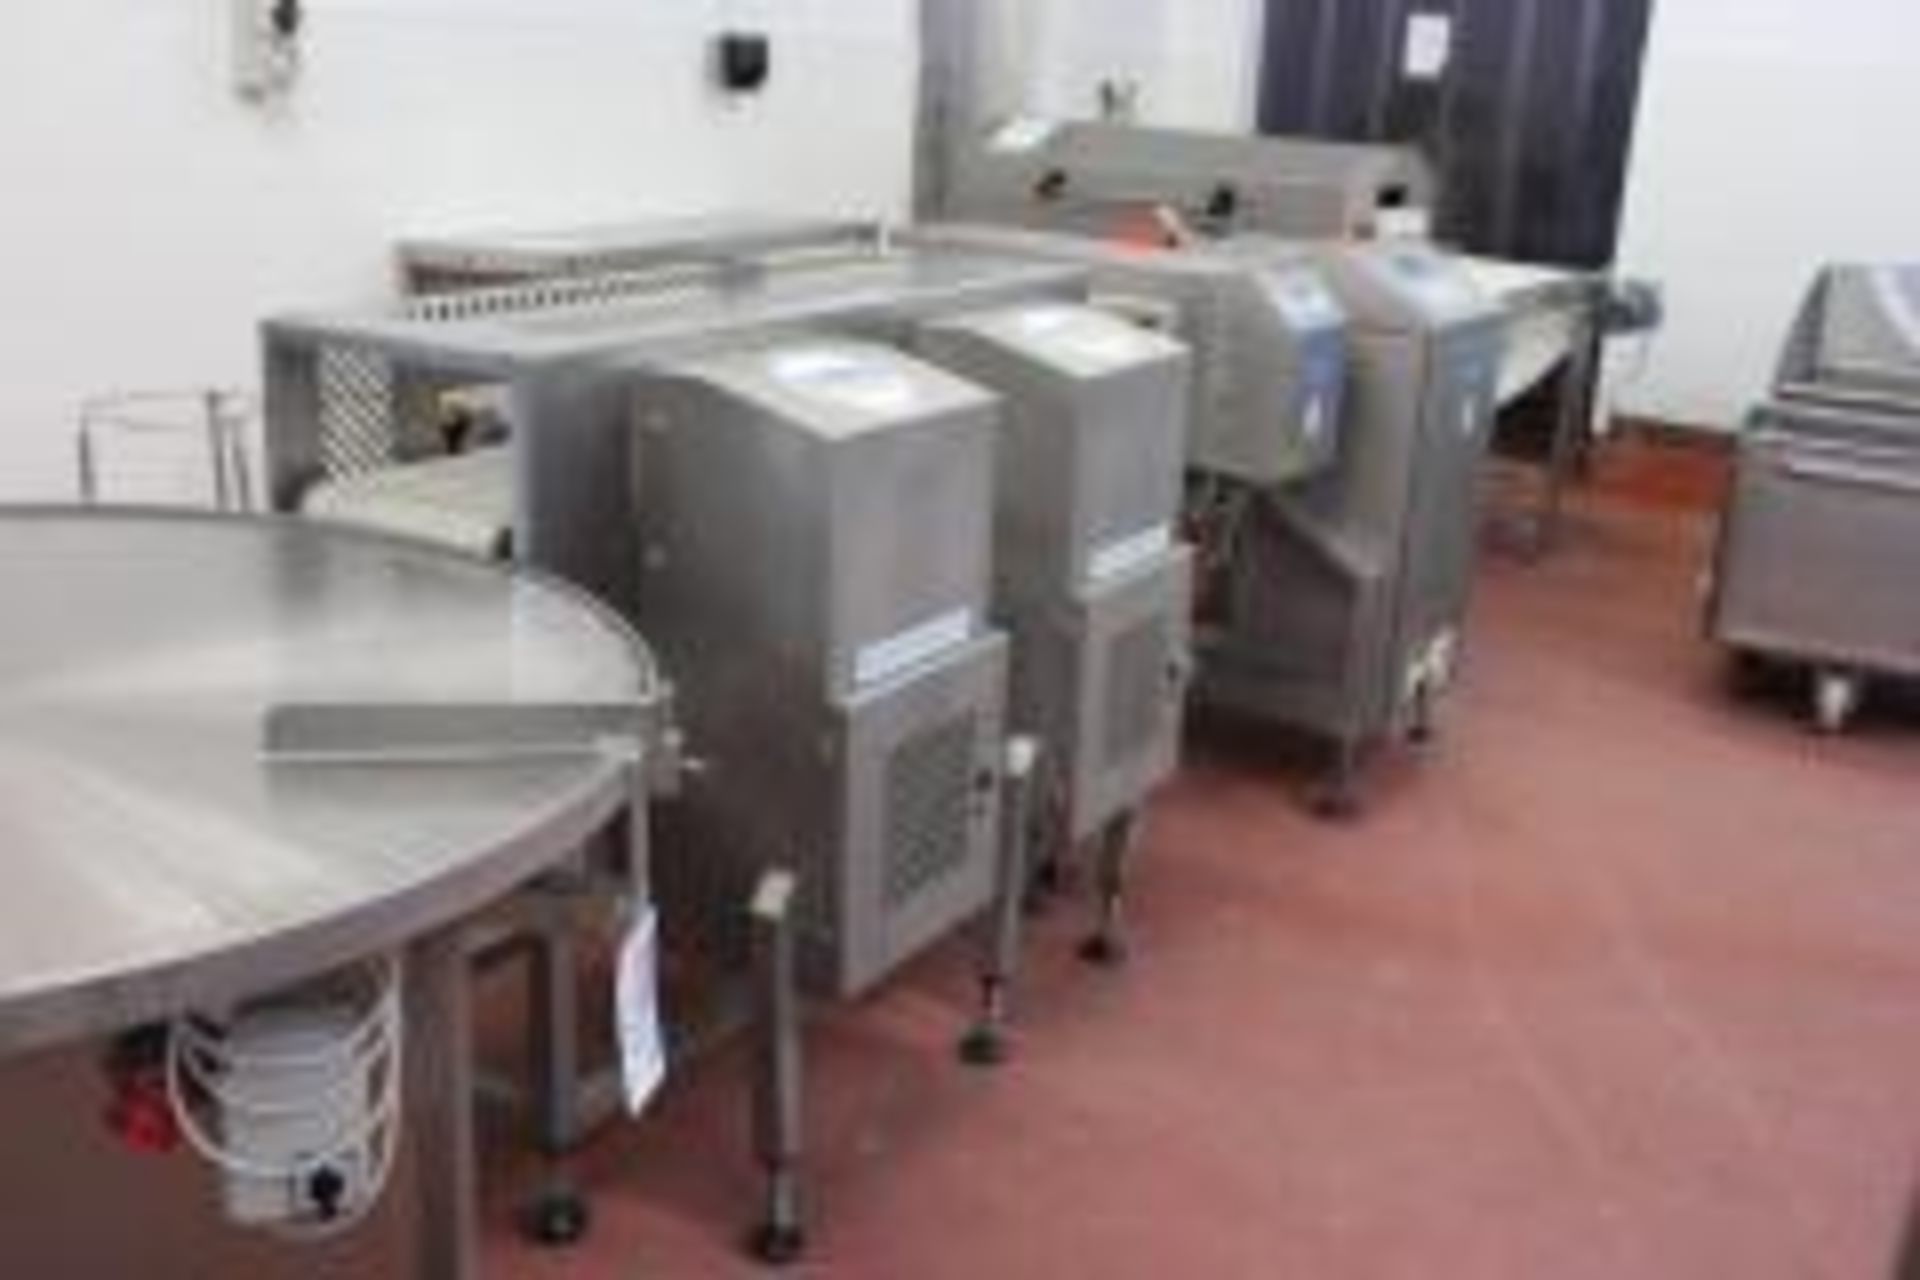 Loma combination metal detector check weigher IQ2 metal detector aperture 350mm x 85mm AS check